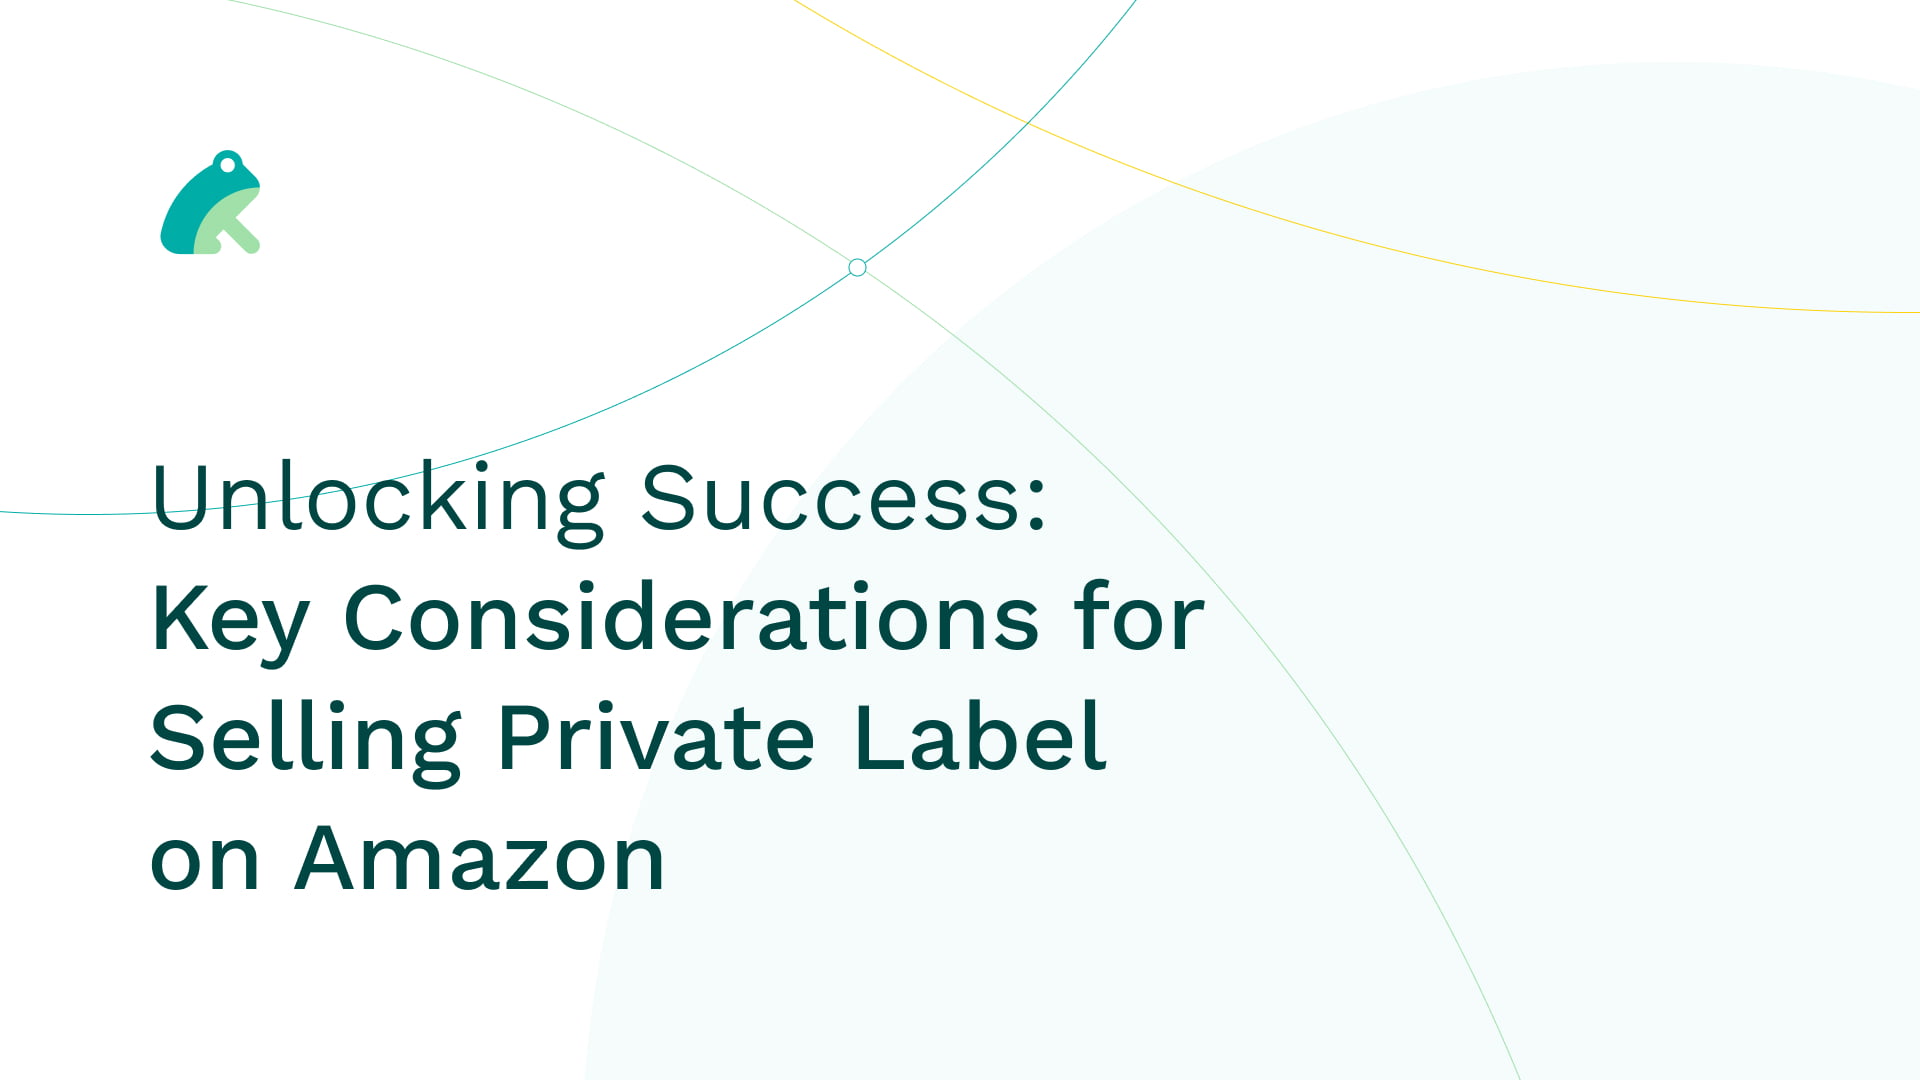 Unlocking Success: Key Considerations for Selling Private Label on Amazon